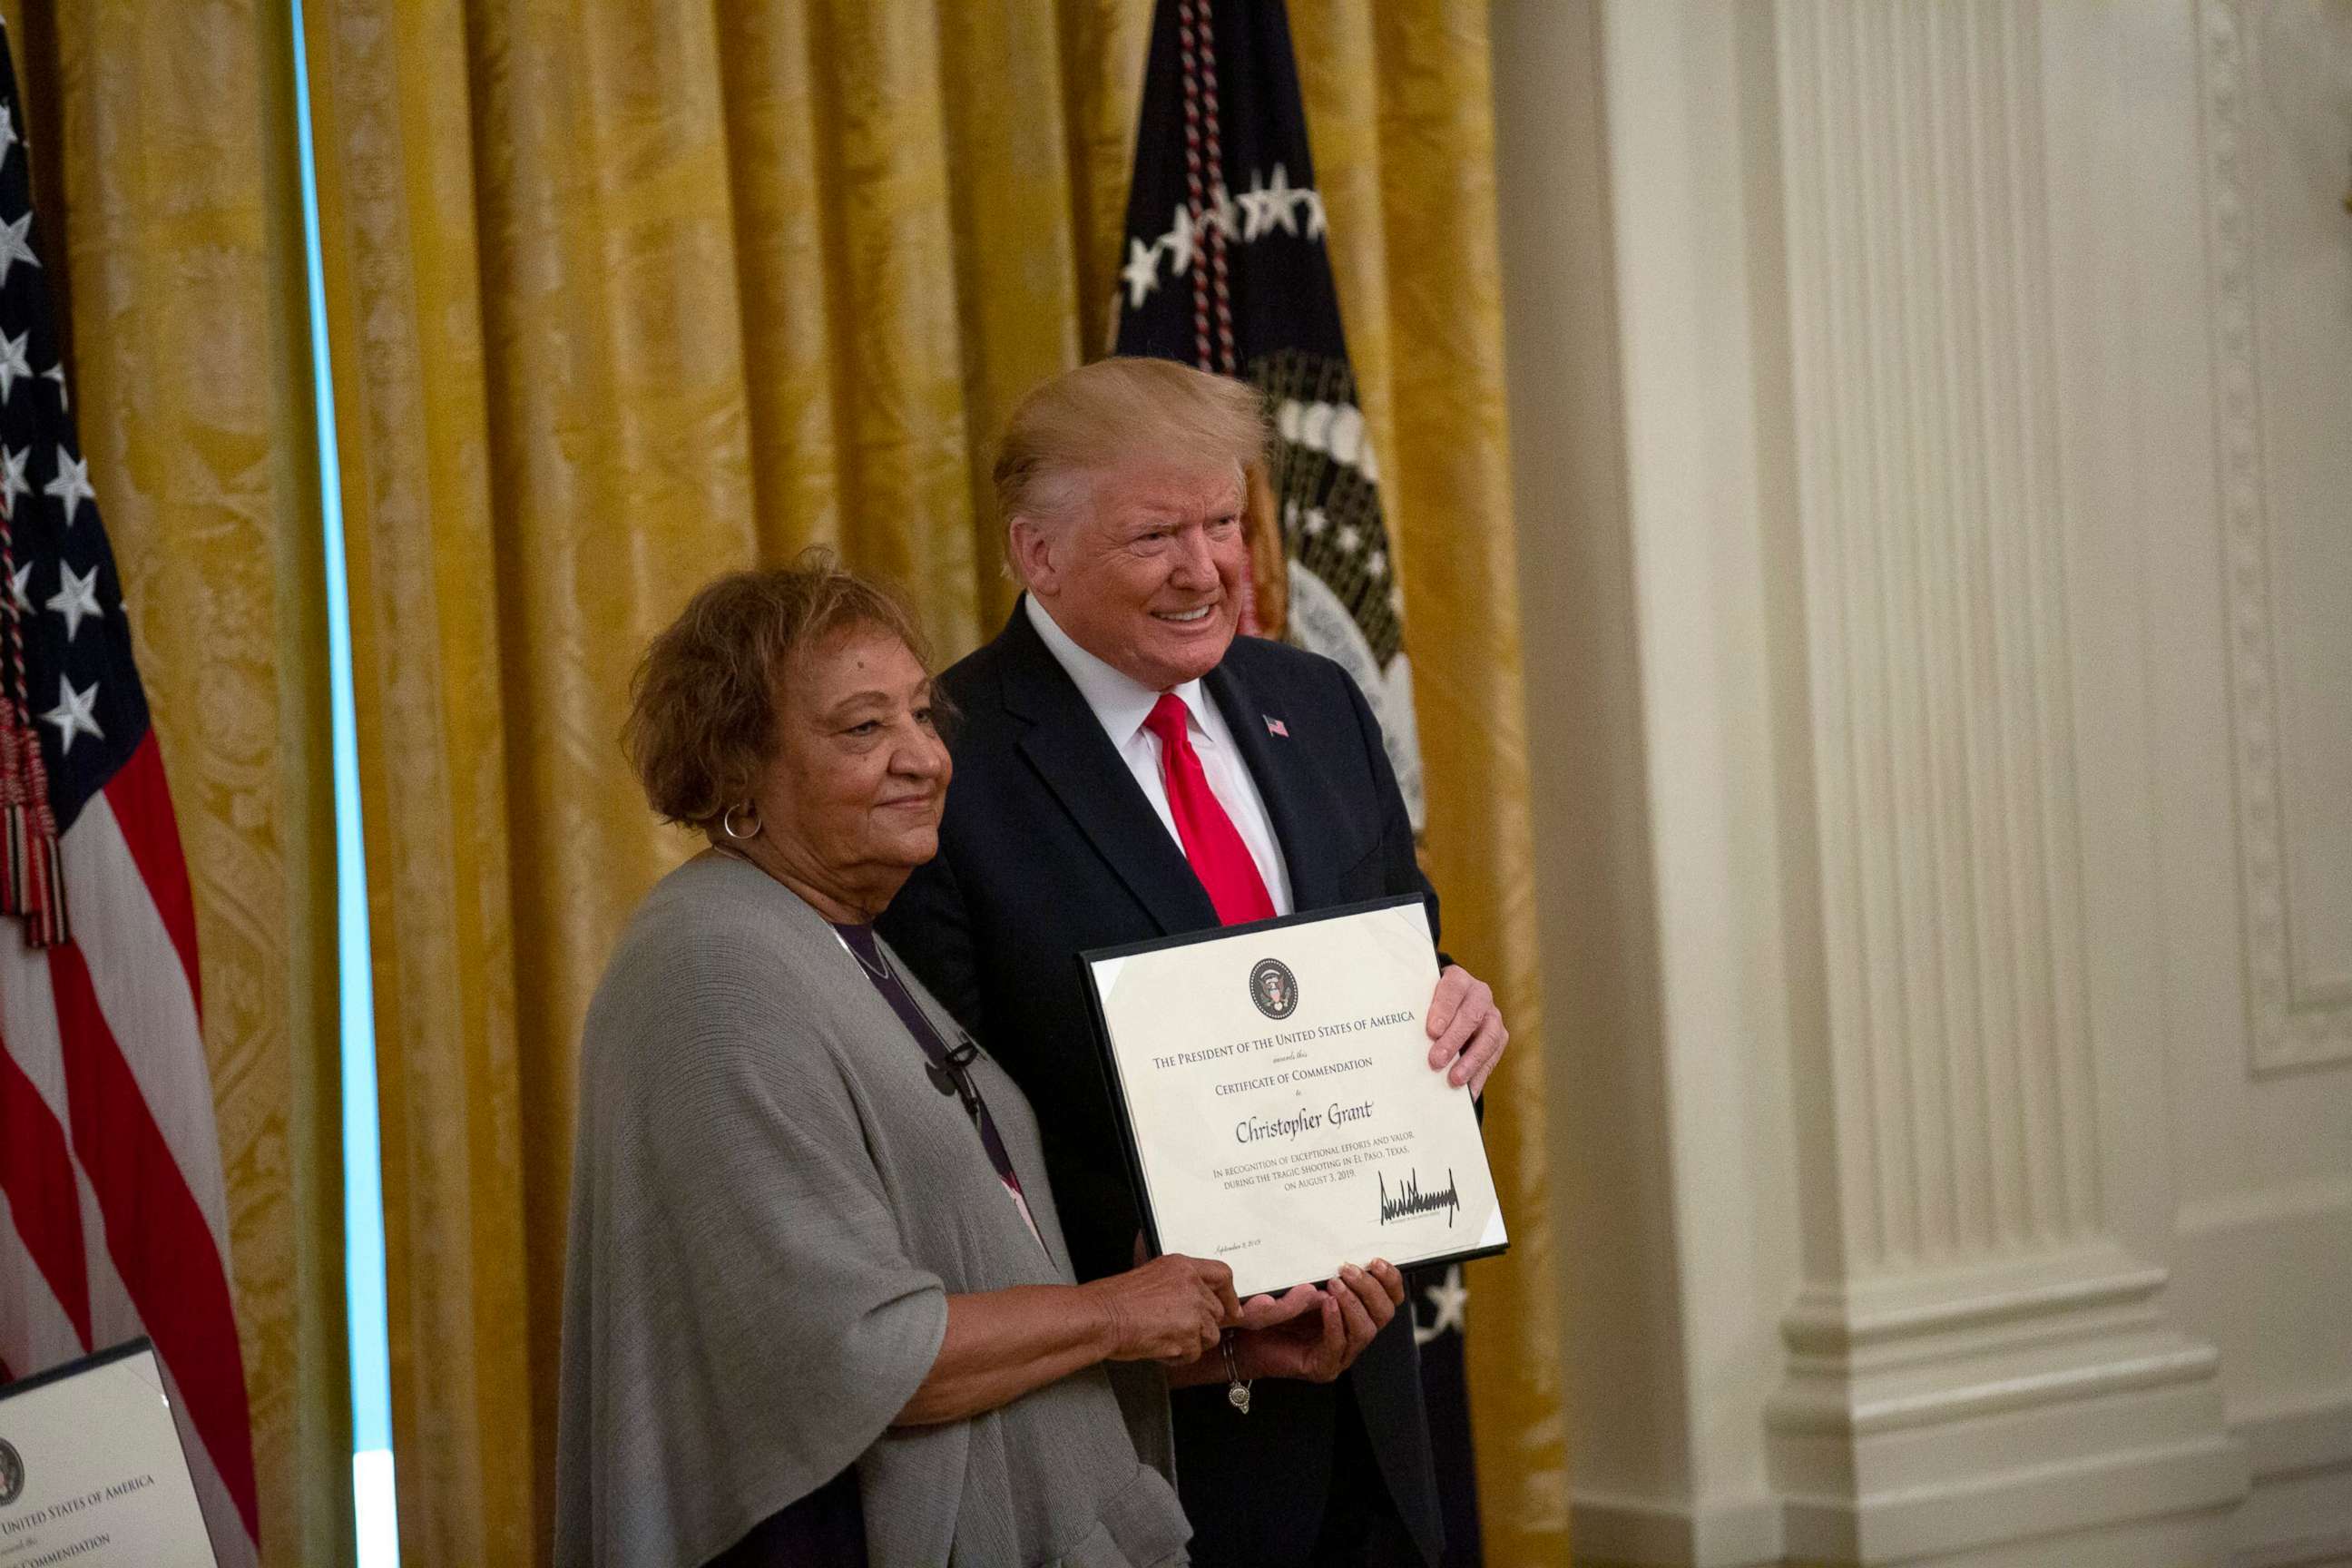 PHOTO: Ms. Minnie Grant accepts Heroic Commendations from President Donald J. Trump on behalf of her son, Chris Grant, in an East Room ceremony at the White House in Washington D.C., Sept. 9, 2019.